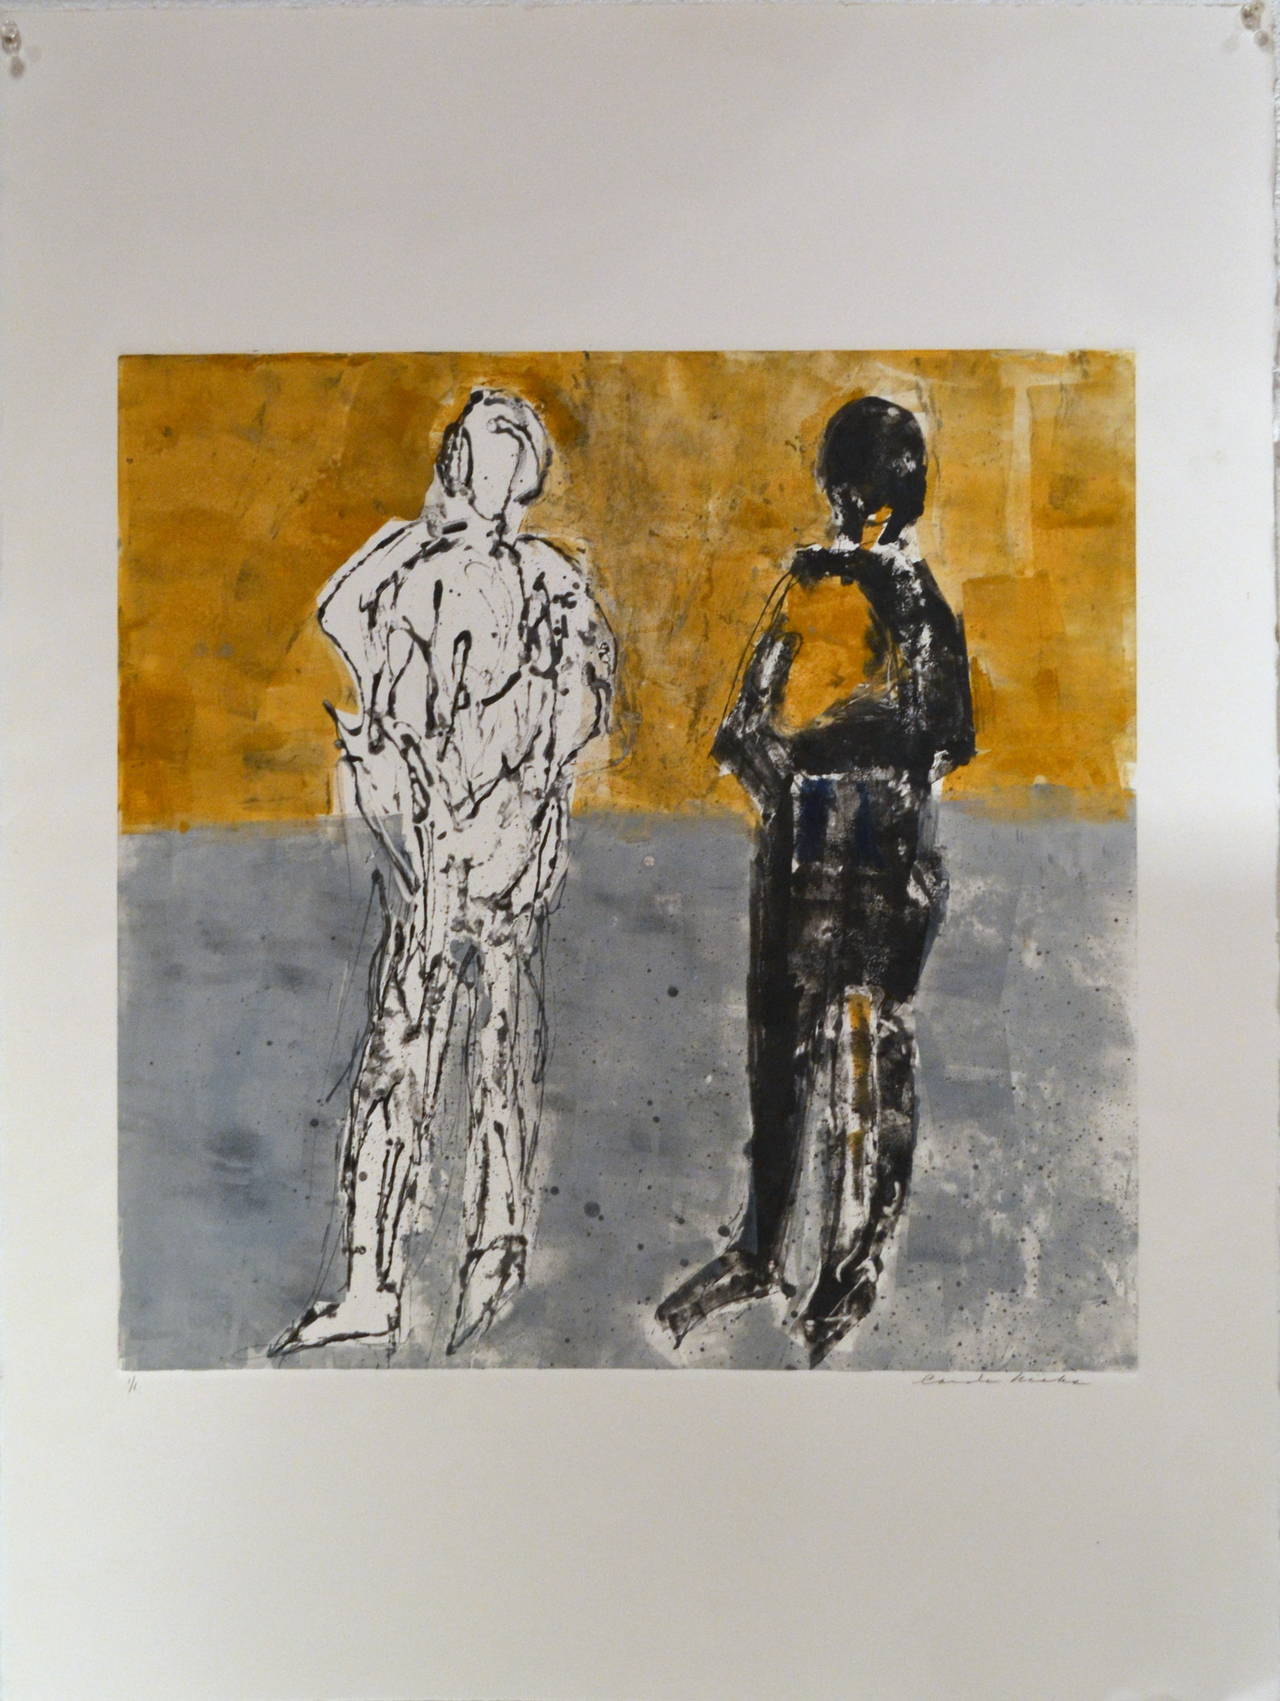 Artist Carole Hicks, a native of California, who is known for her colorful and often whimsical abstract monoprints which are one of a kind original works on paper, not an edition piece. However, in this abstract figurative monoprint titled 